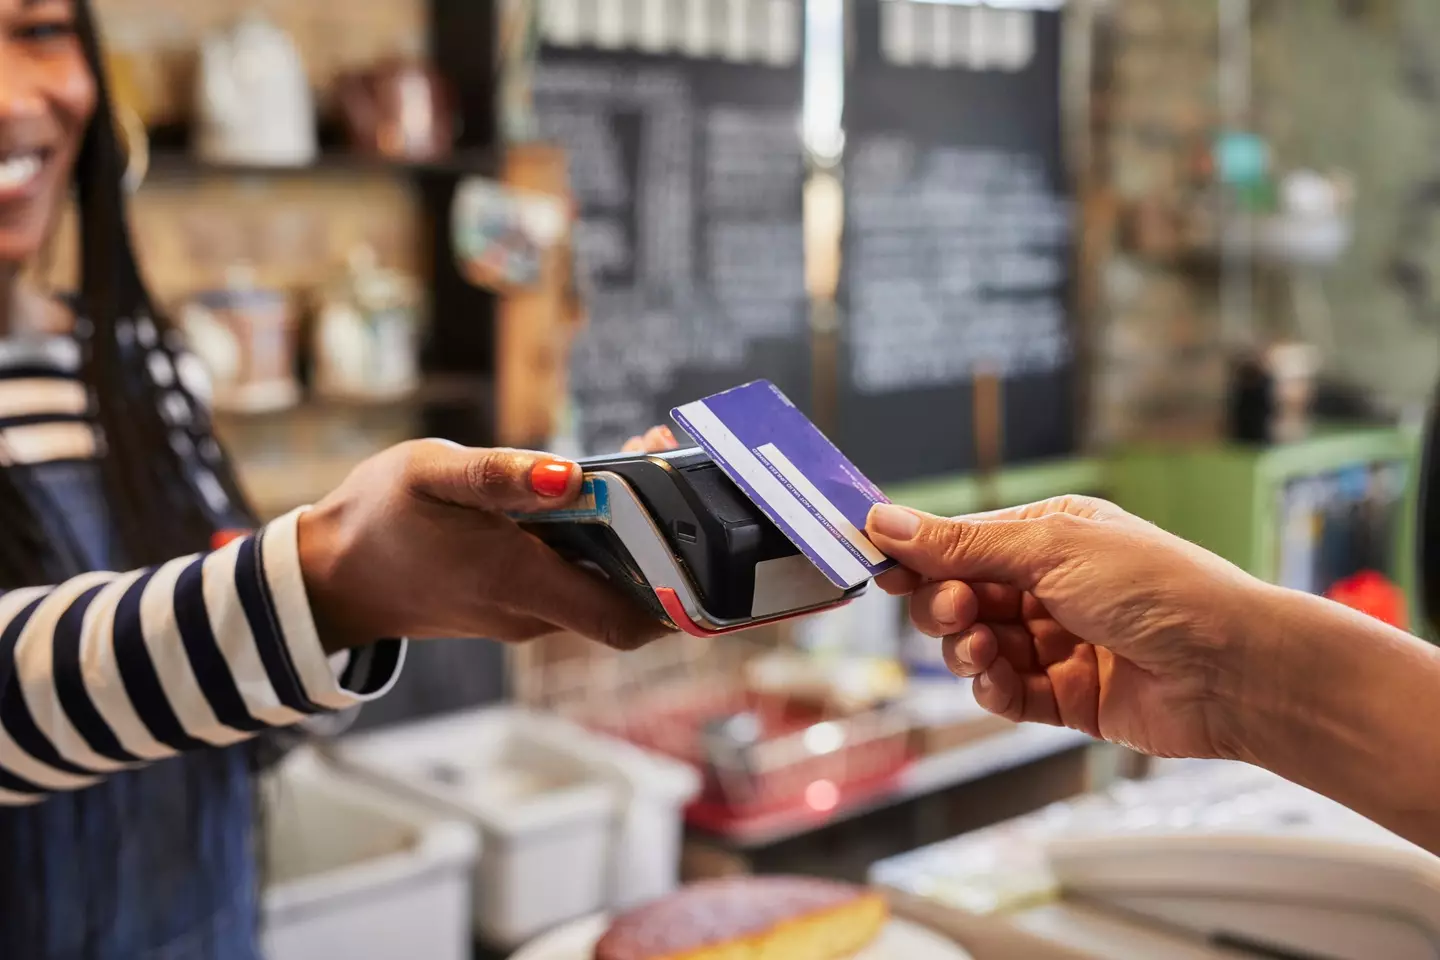 Debit cards are fine as long as you're spending your own money, but overdrafts have big problems.